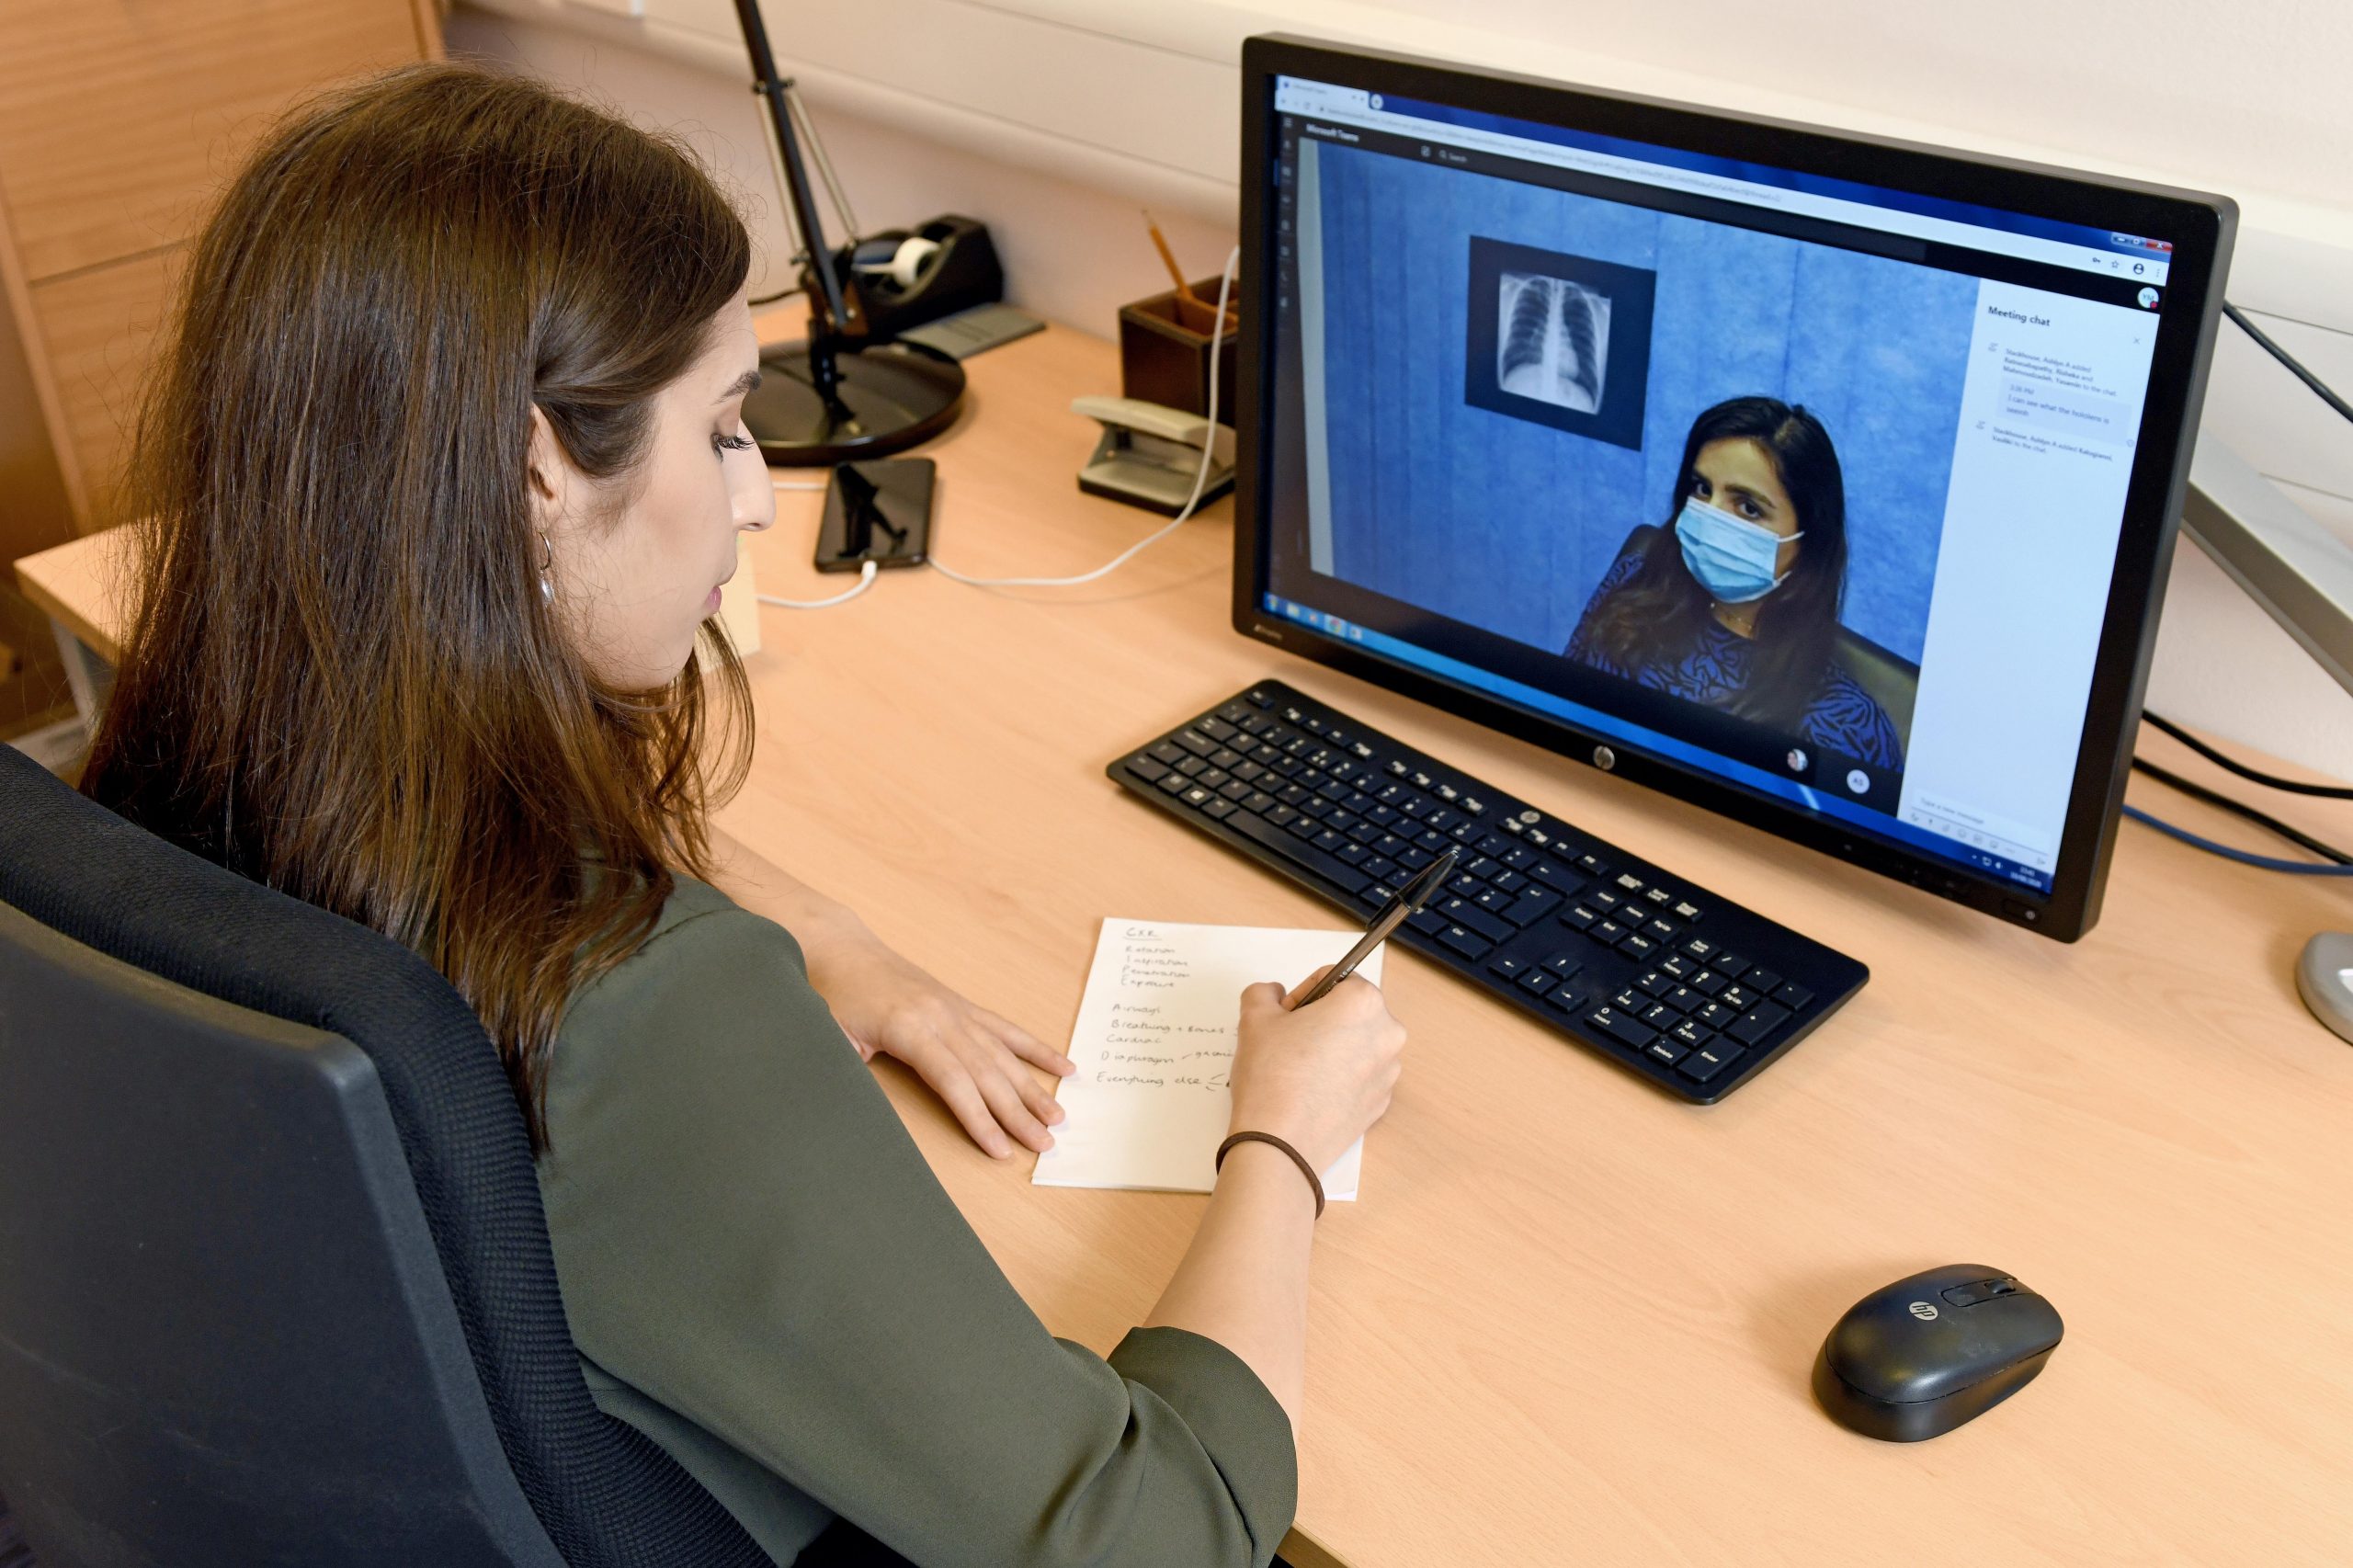 A female student looks at a computer screen showing a HoloLens recording